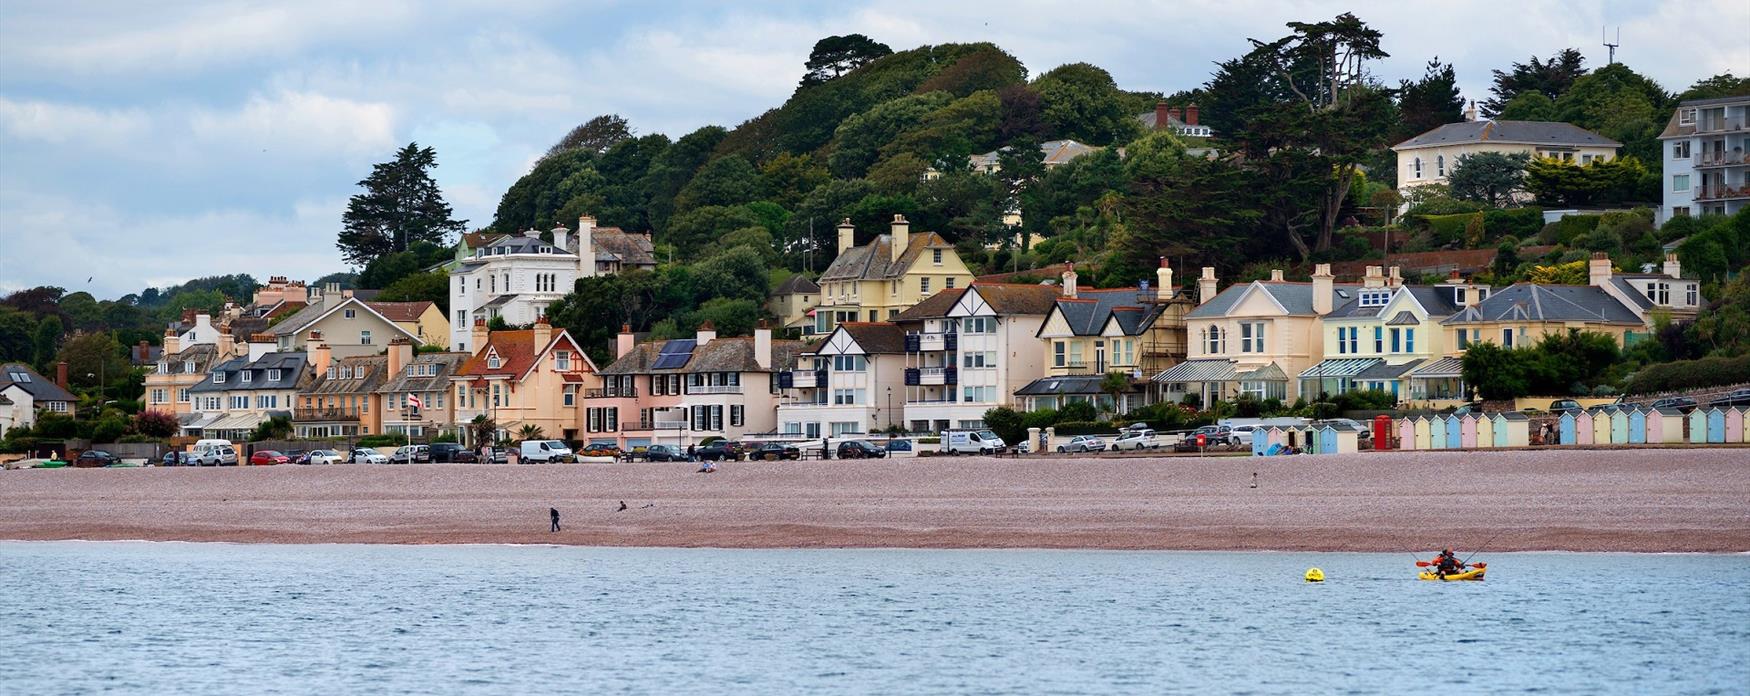 Budleigh Salterton from the sea